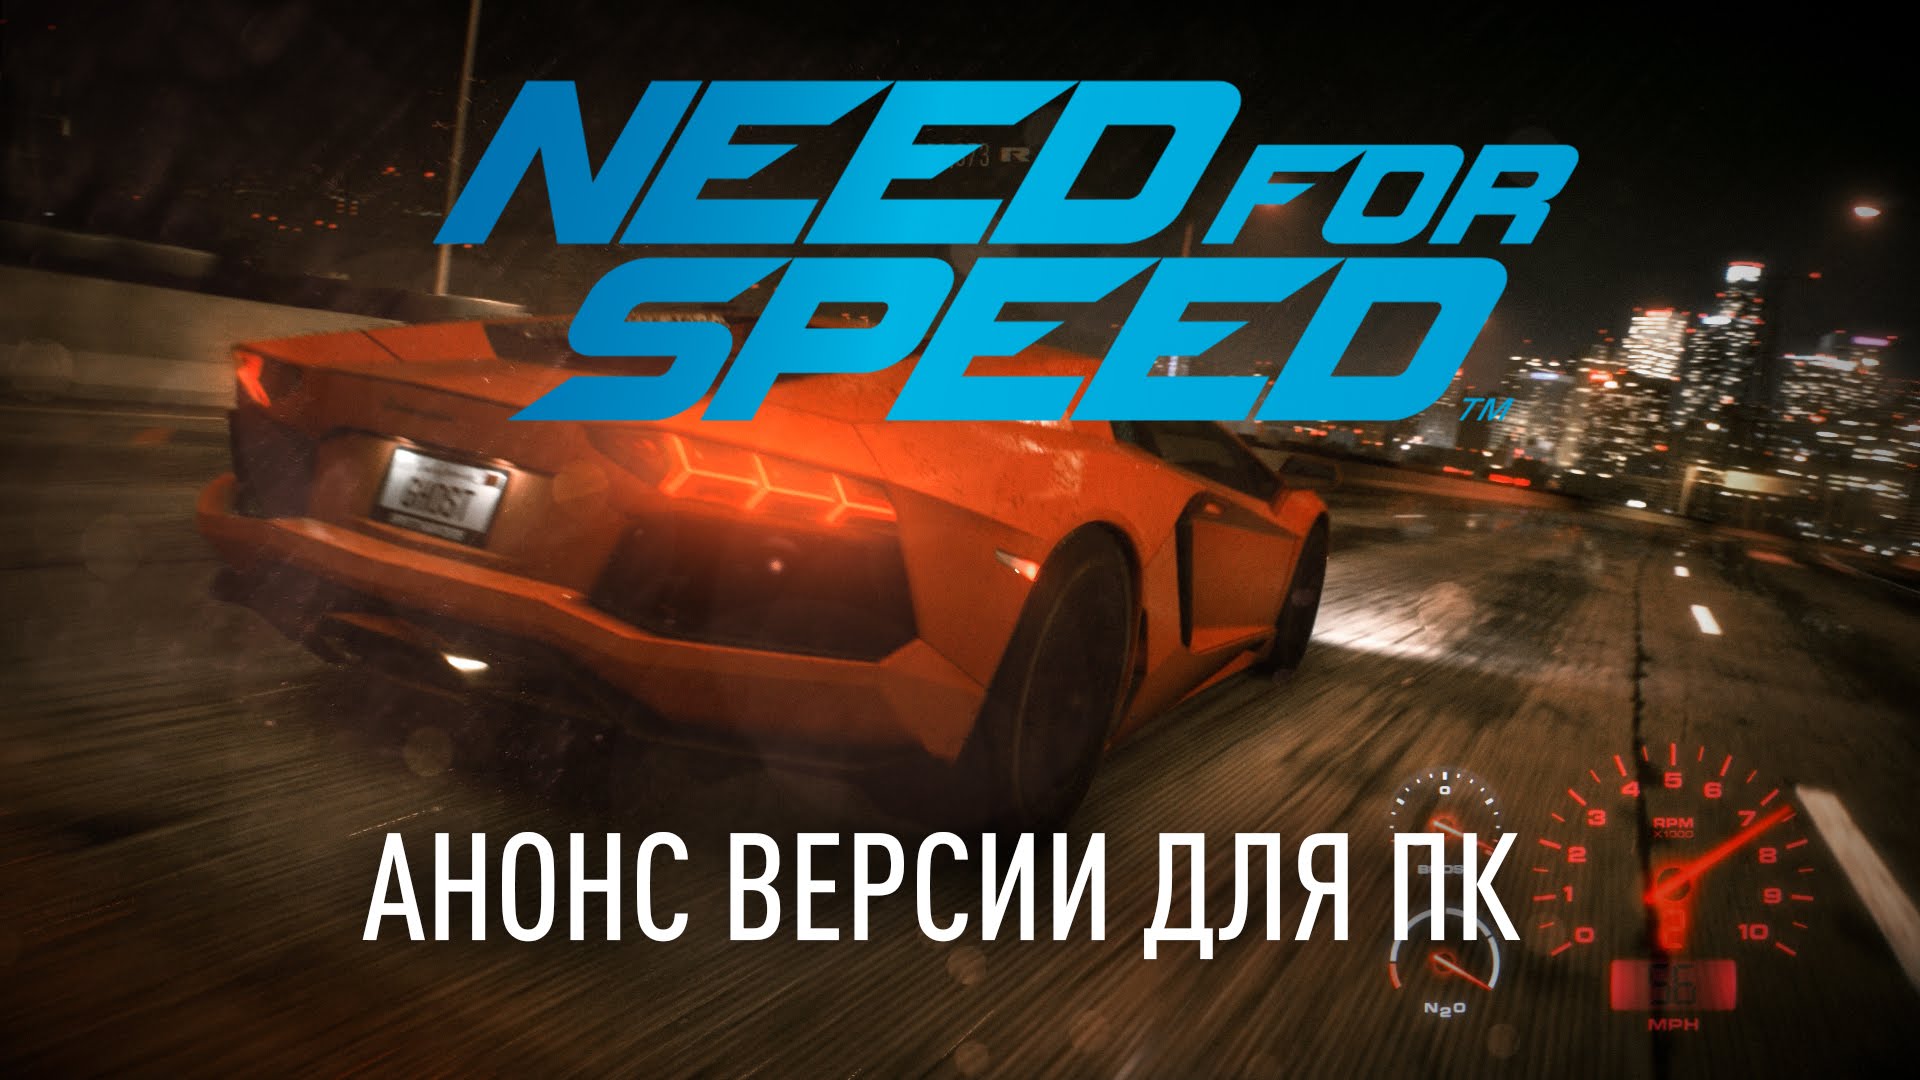 Гонки need for Speed трейлер. Need for Drive Team. Live for Speed. Кто такой Speed.